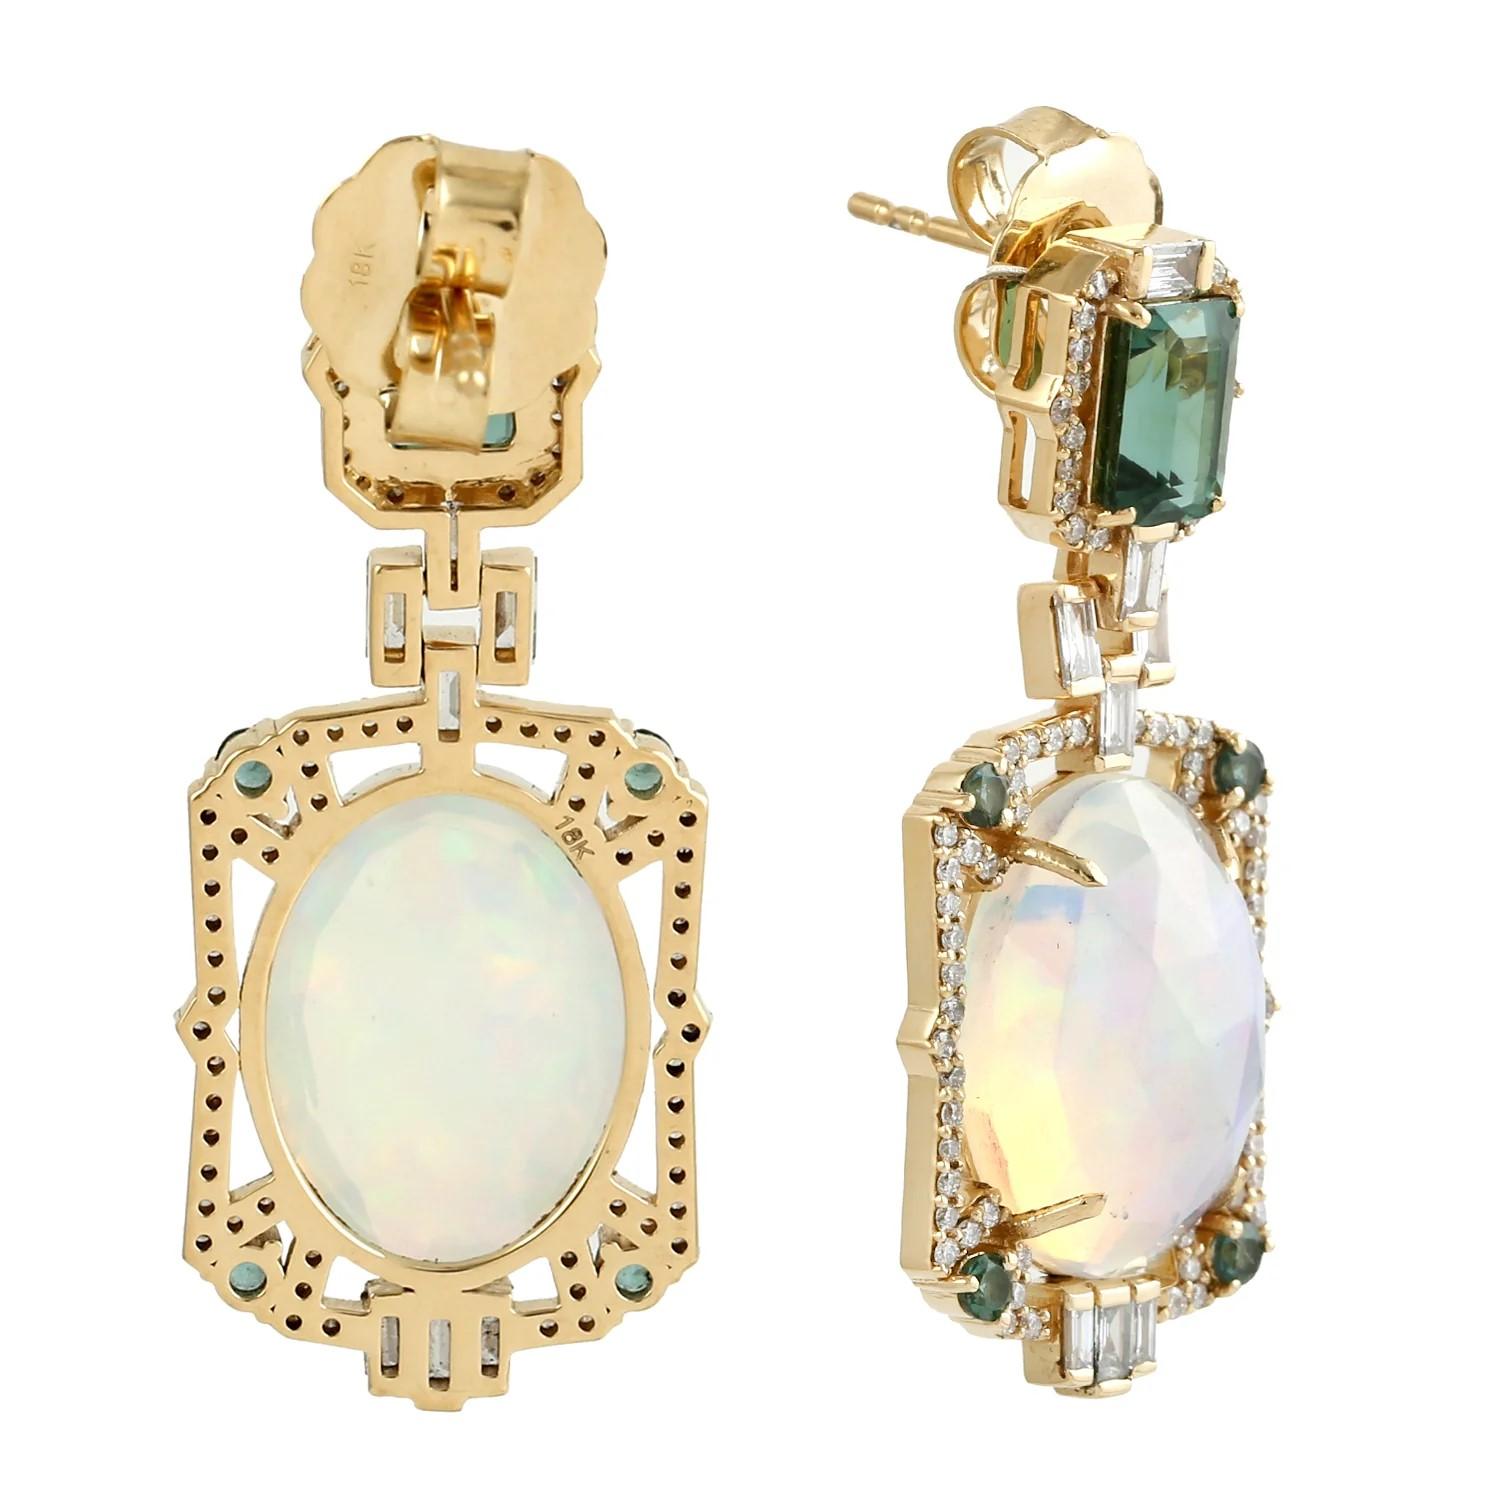 Handcrafted from 18-karat gold, these exquisite drop earrings are set with 10.03 carats Ethiopian Opal, 2.91 carats green tourmaline and 1.15 carats of glimmering diamonds. 

FOLLOW  MEGHNA JEWELS storefront to view the latest collection & exclusive